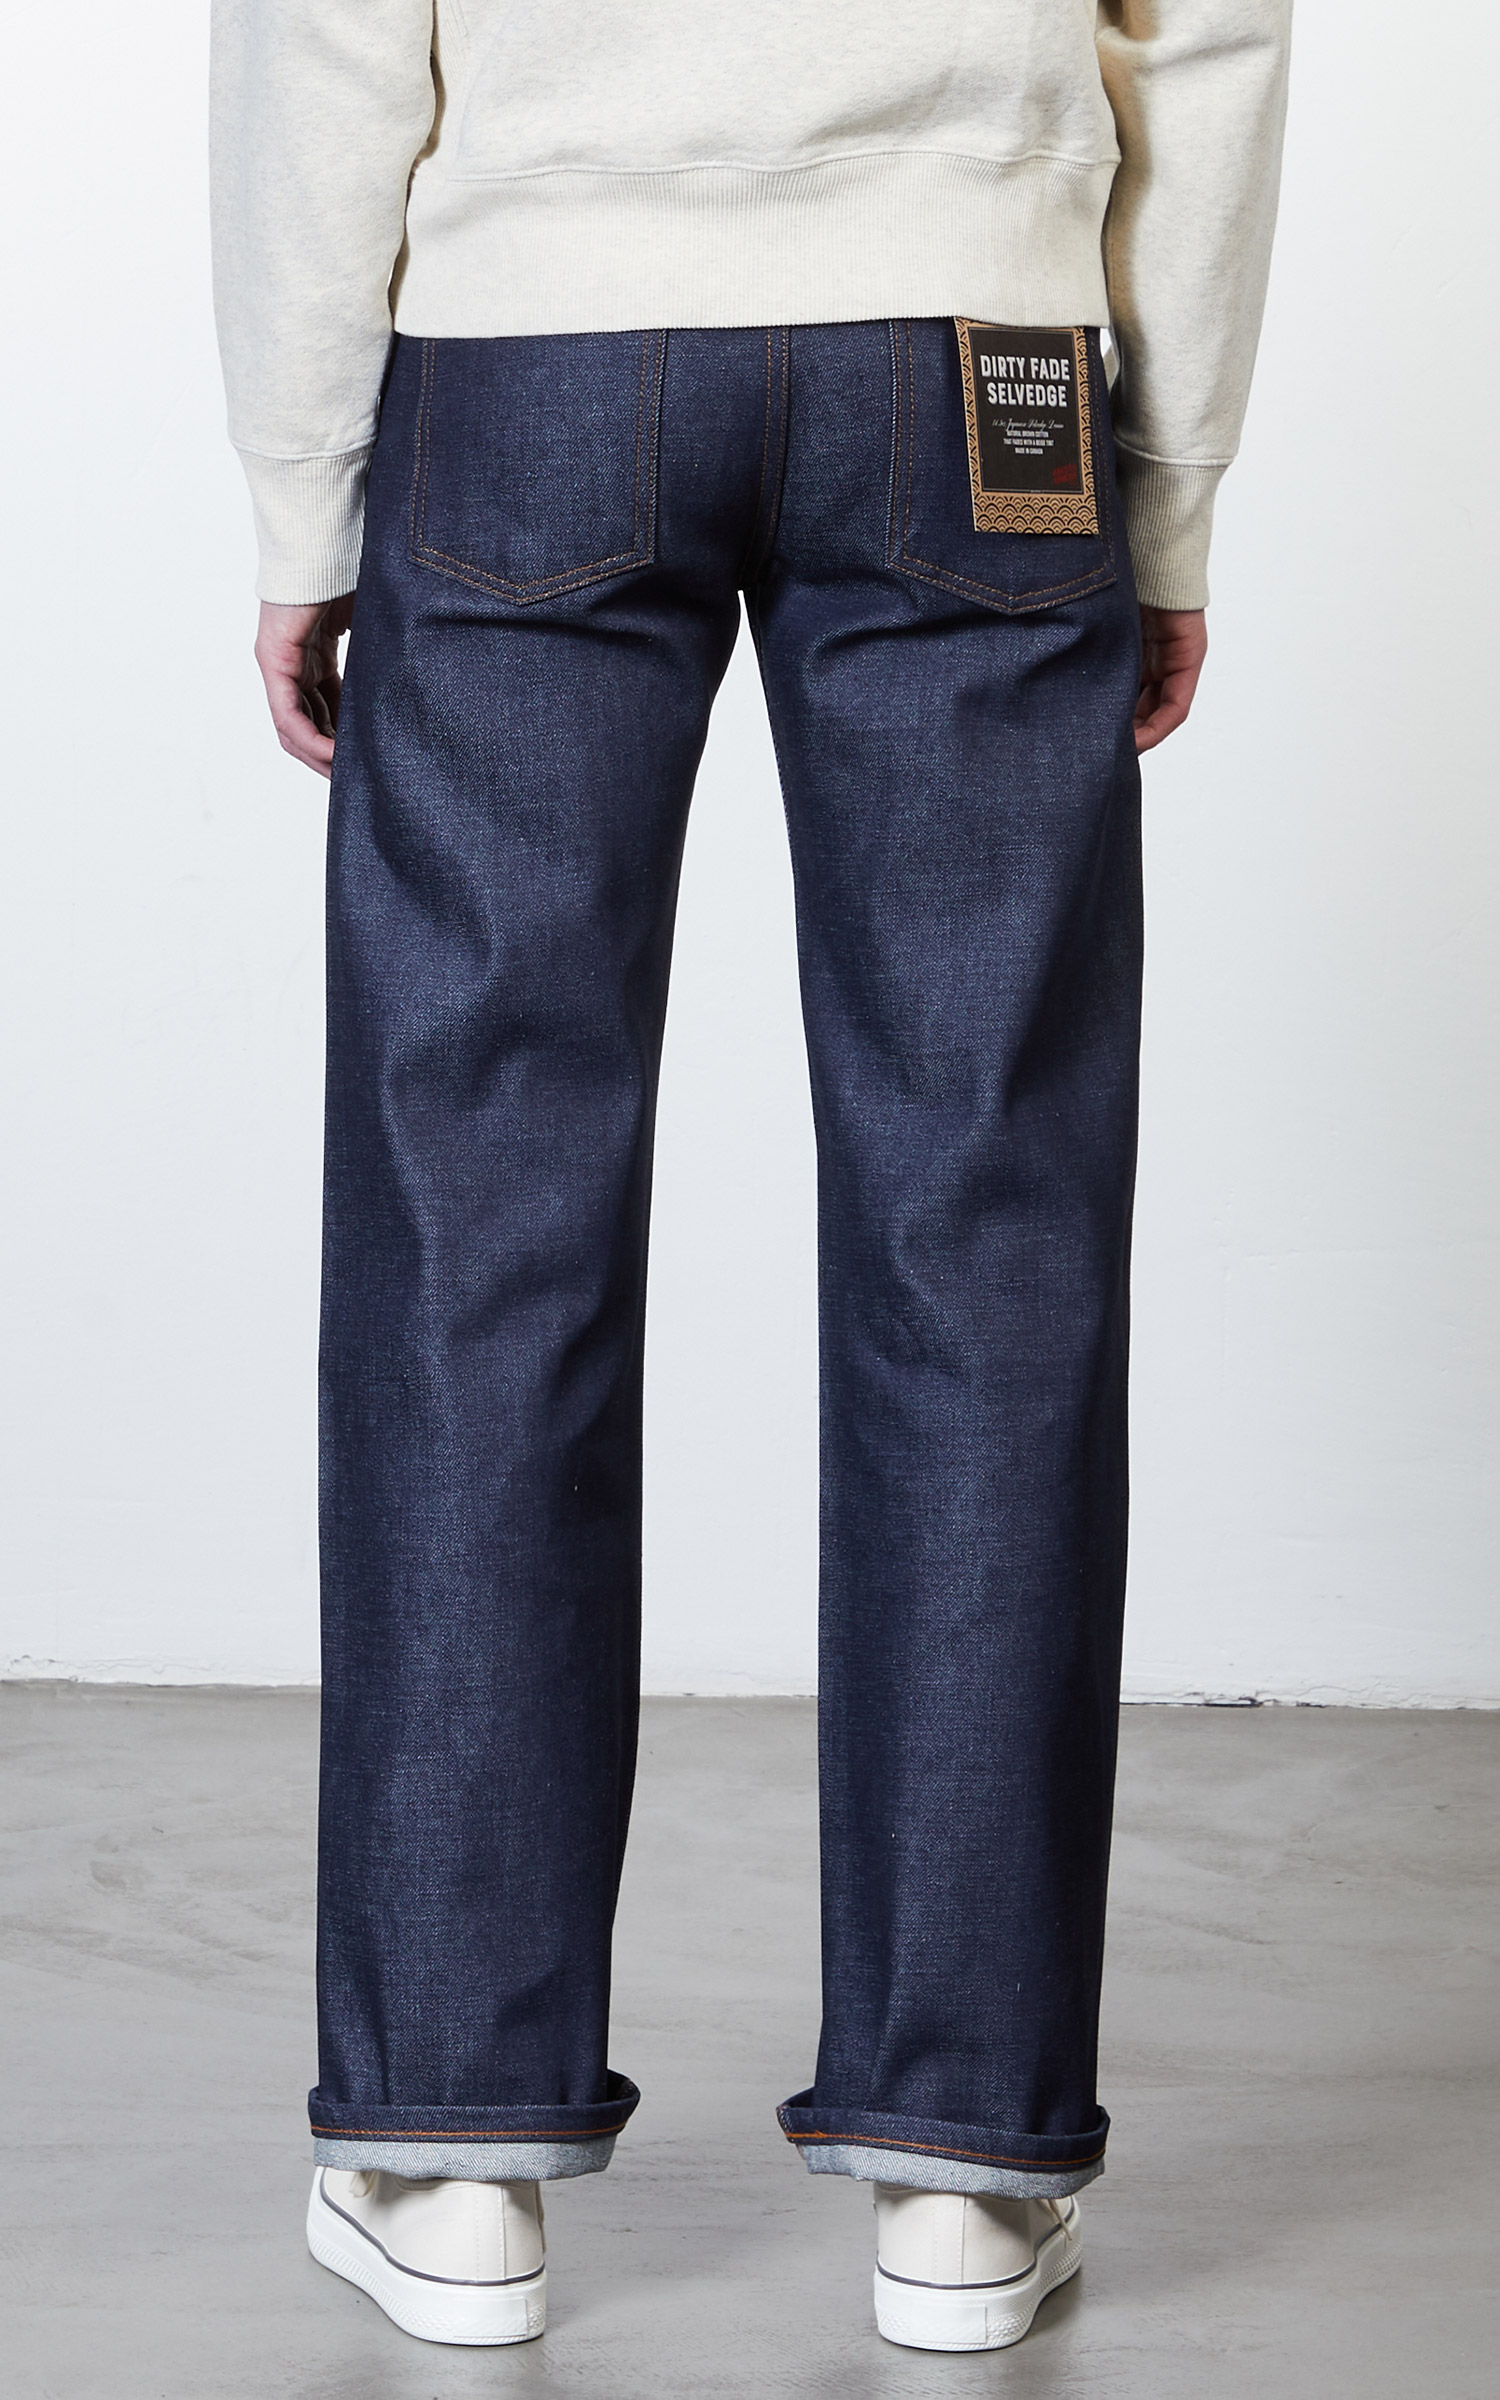 Naked & Famous Denim Strong Guy Dirty Fade Selvedge 14.5oz | Cultizm